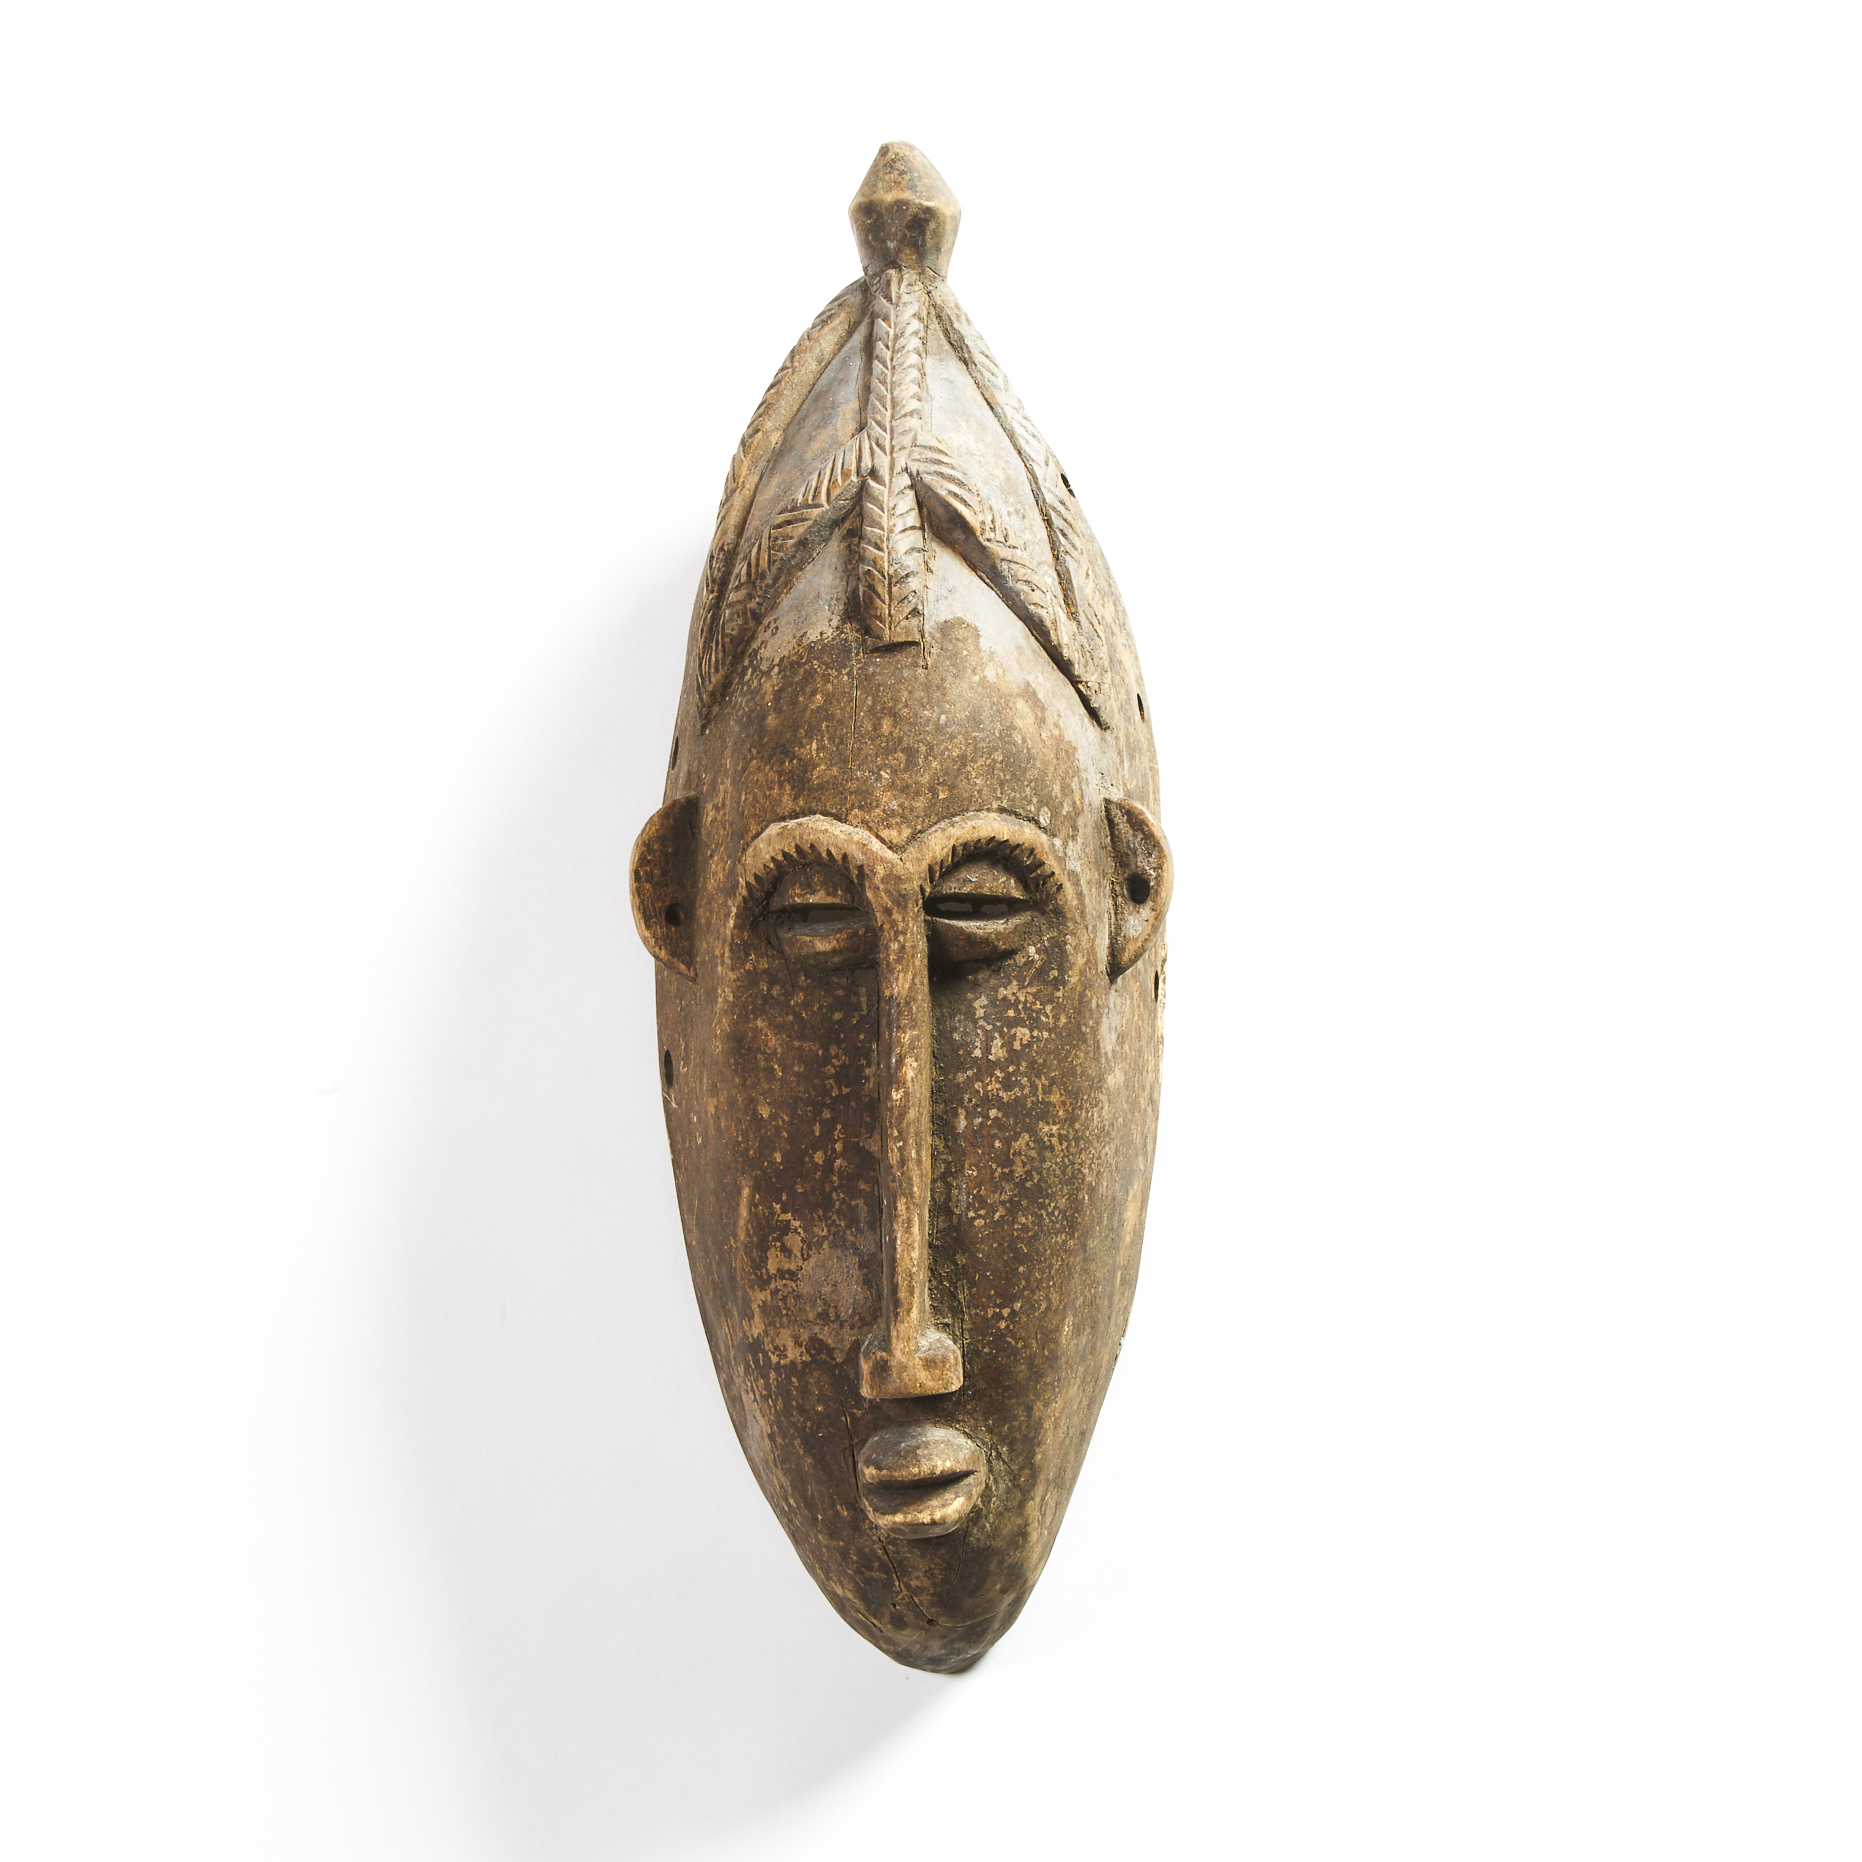 West African Mask, possibly Senufo, mid to late 20th century